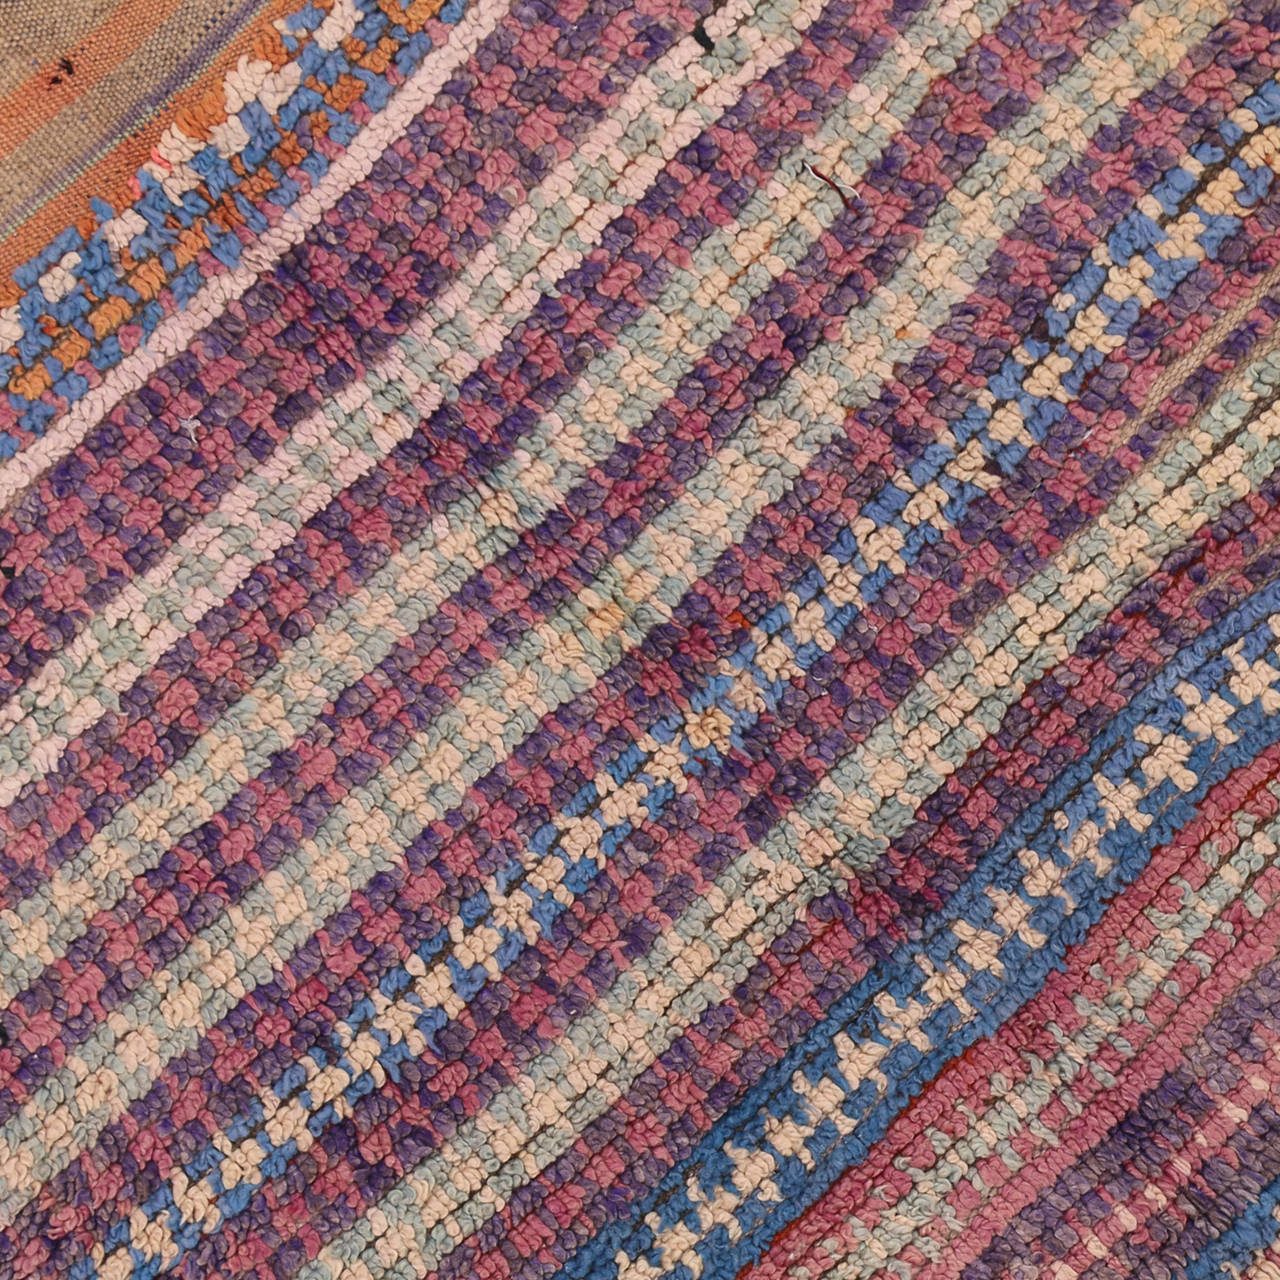 Moroccan carpets can transform a plain space into a lively interior. This delightful Moroccan rug showcases a delicate palette of pastels in narrow horizontal stripes. The lack of static designs in this vintage Moroccan gives it a free and